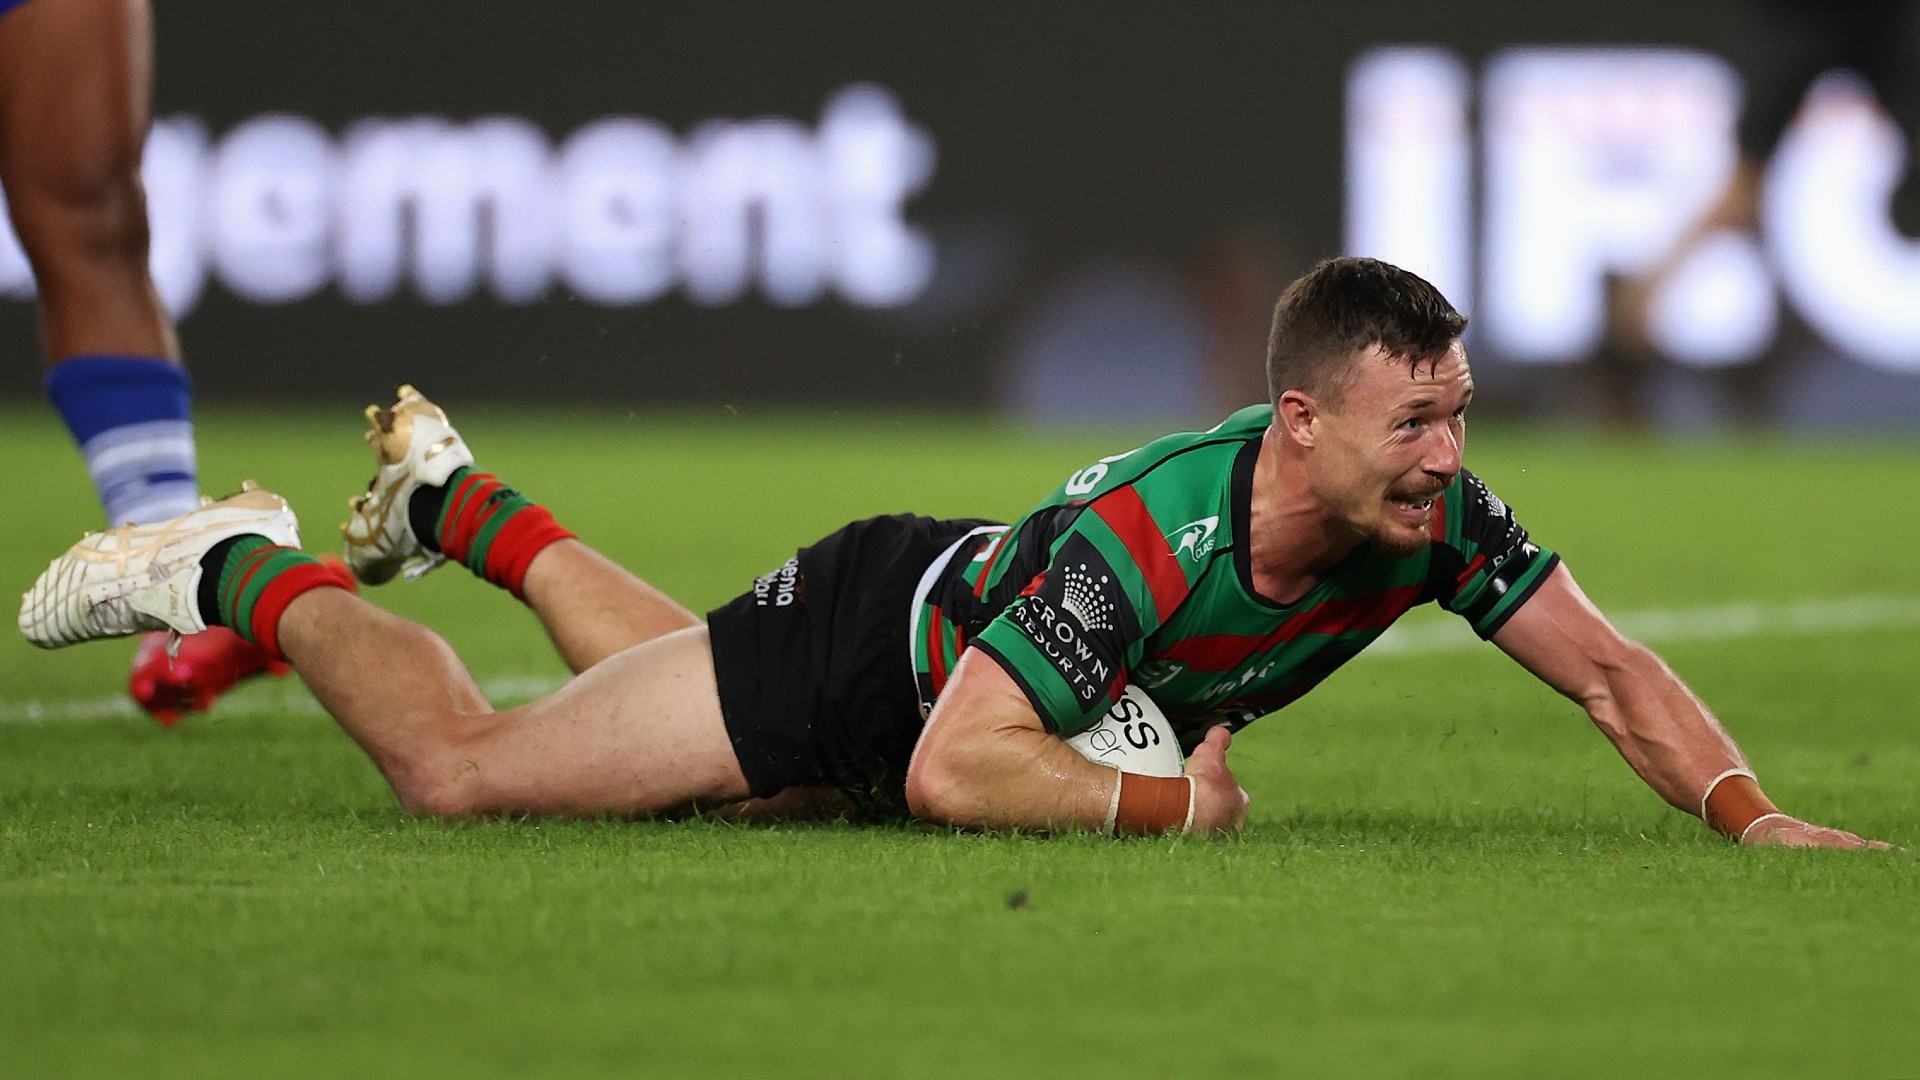 South Sydney Rabbitohs beat Canterbury Bulldogs as Damien Cook scores hat trick